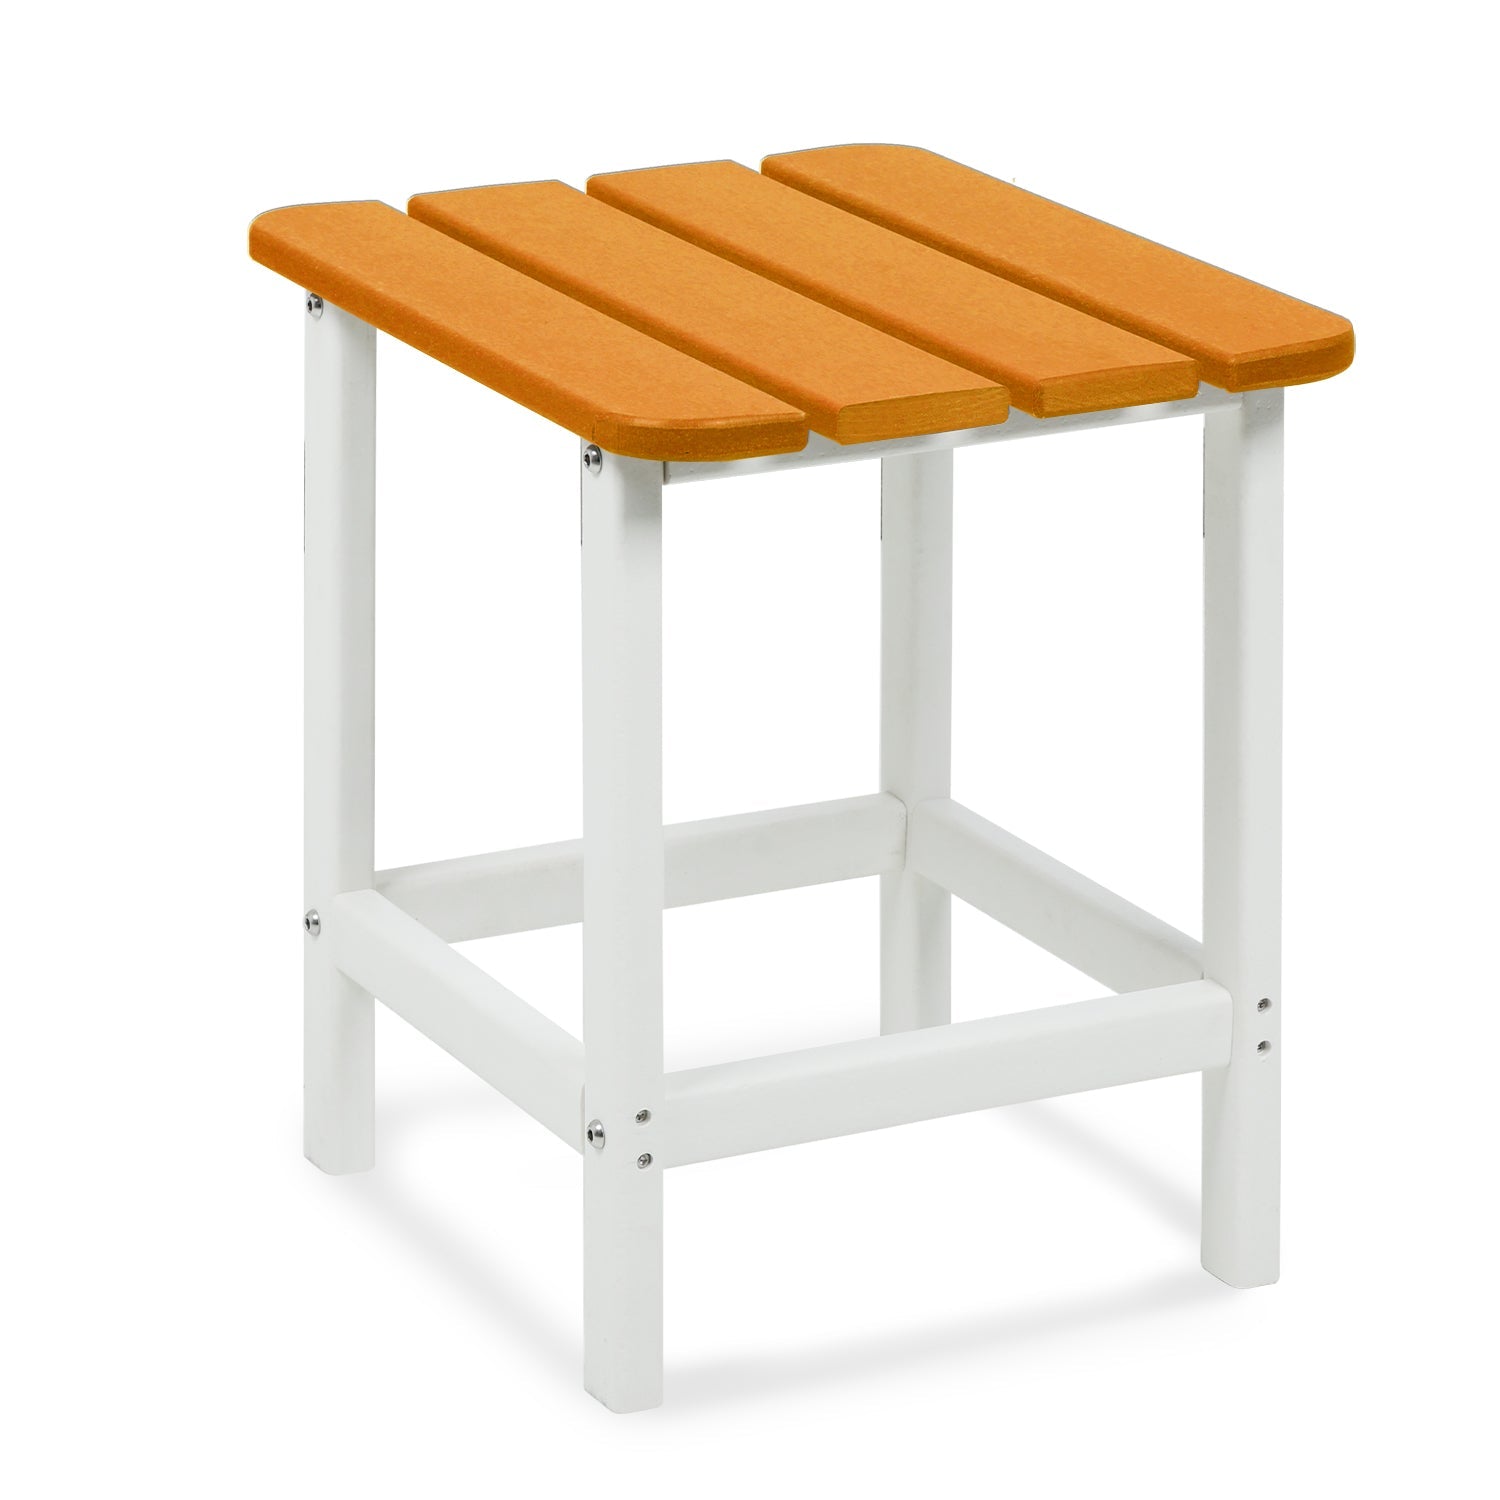 Outdoor Side Table, Square Adirondack Patio End Table for Patio, Pool, Porch Furniture Aoodor Orange  